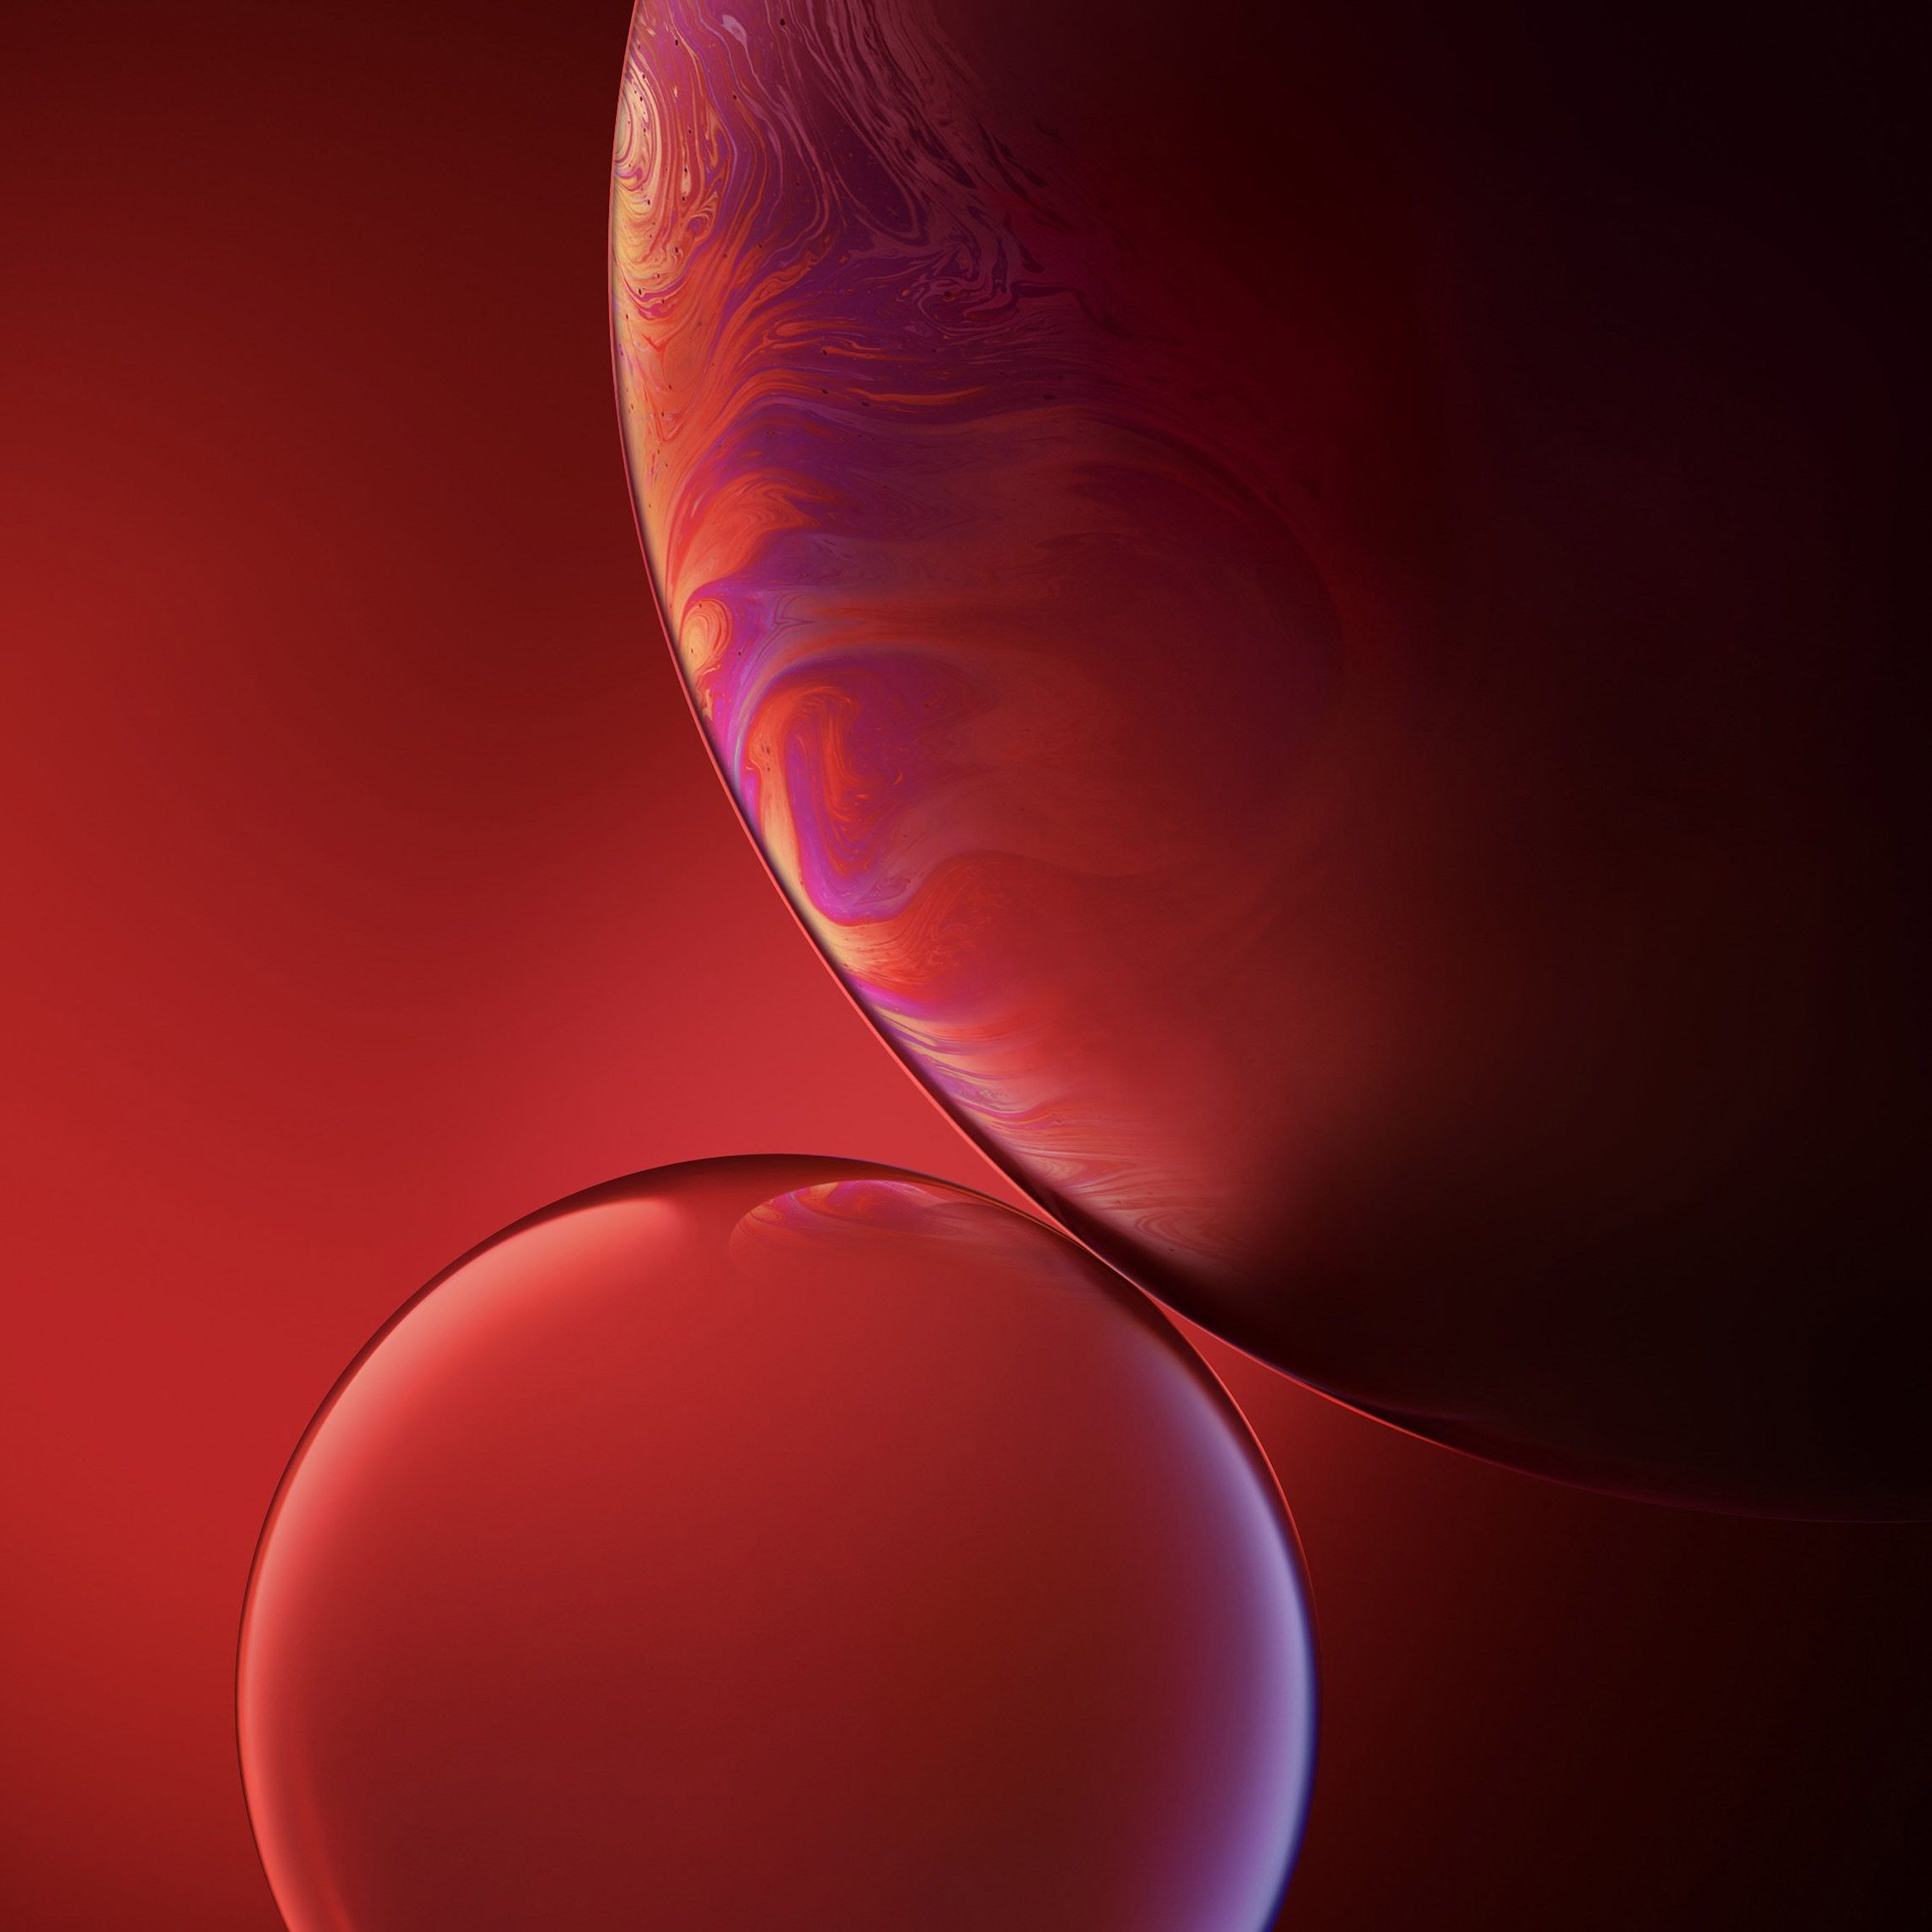 Iphone Xs Max Apple Official Art Red Bubble Wallpaper